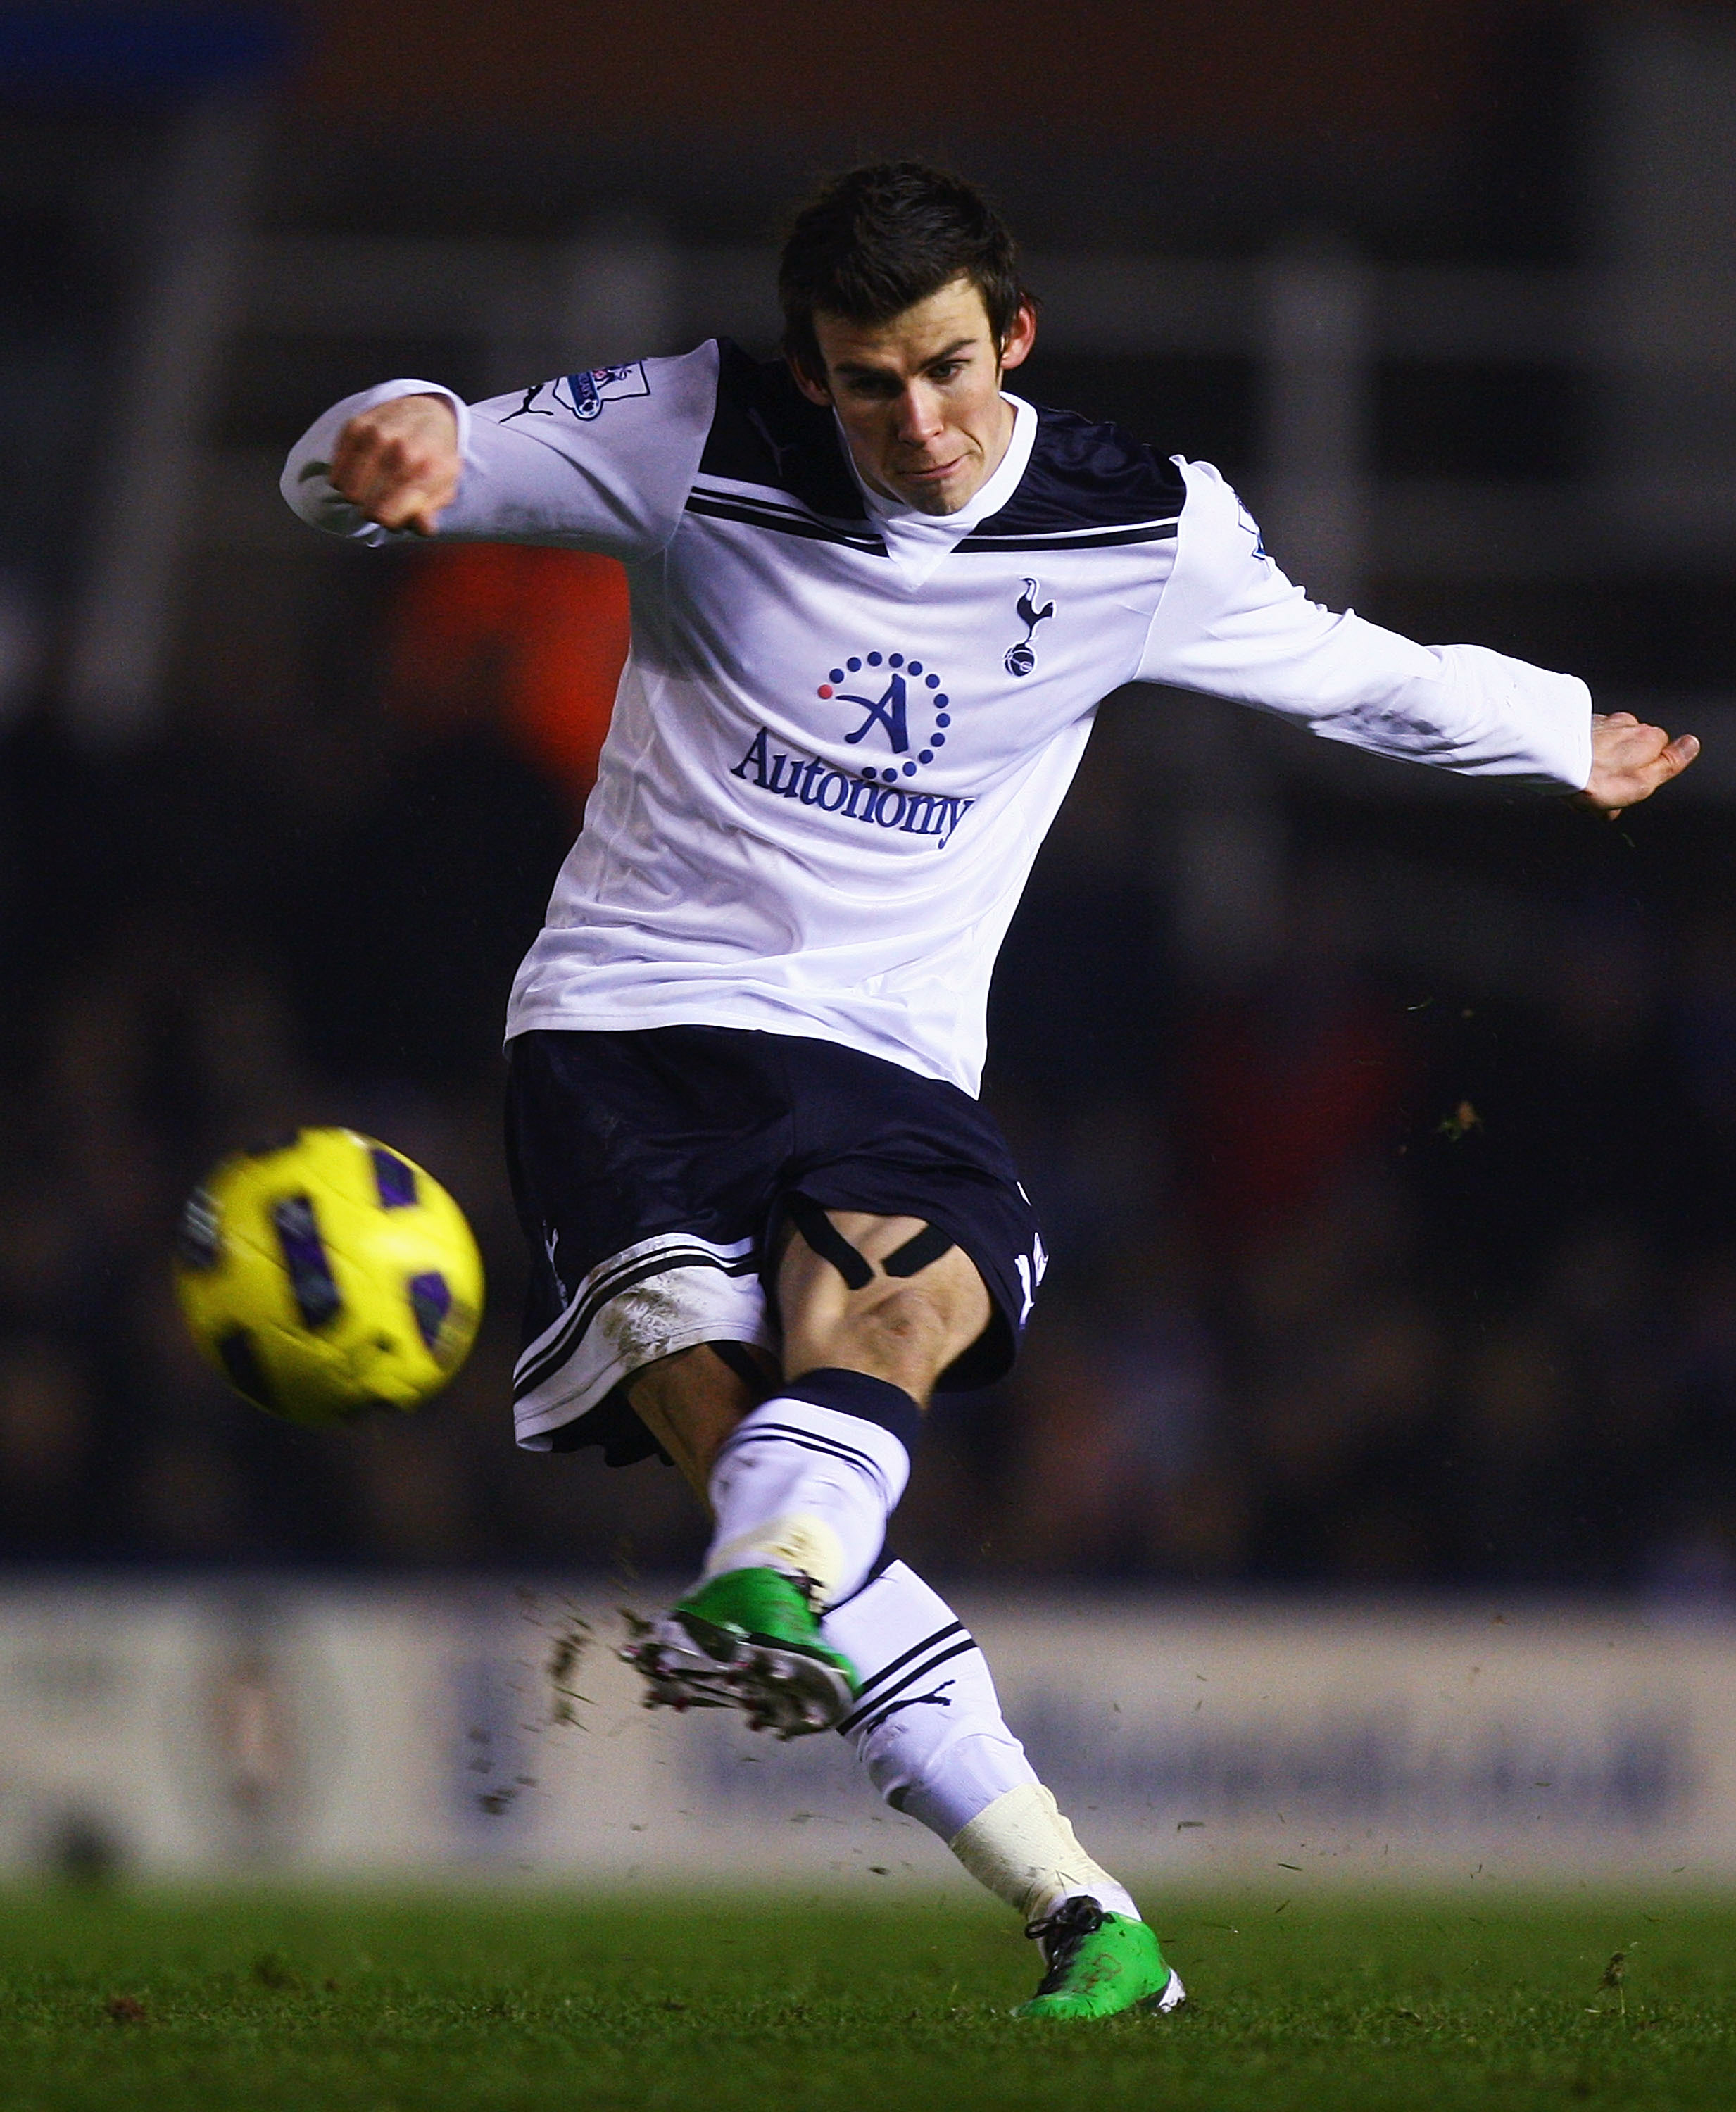 BIRMINGHAM, ENGLAND - DECEMBER 04:  Gareth Bale of Tottenham Hotspur in action during the Barclays Premier League match between Birmingham City and Tottenham Hotspur at St Andrews on December 4, 2010 in Birmingham, England.  (Photo by Matthew Lewis/Getty